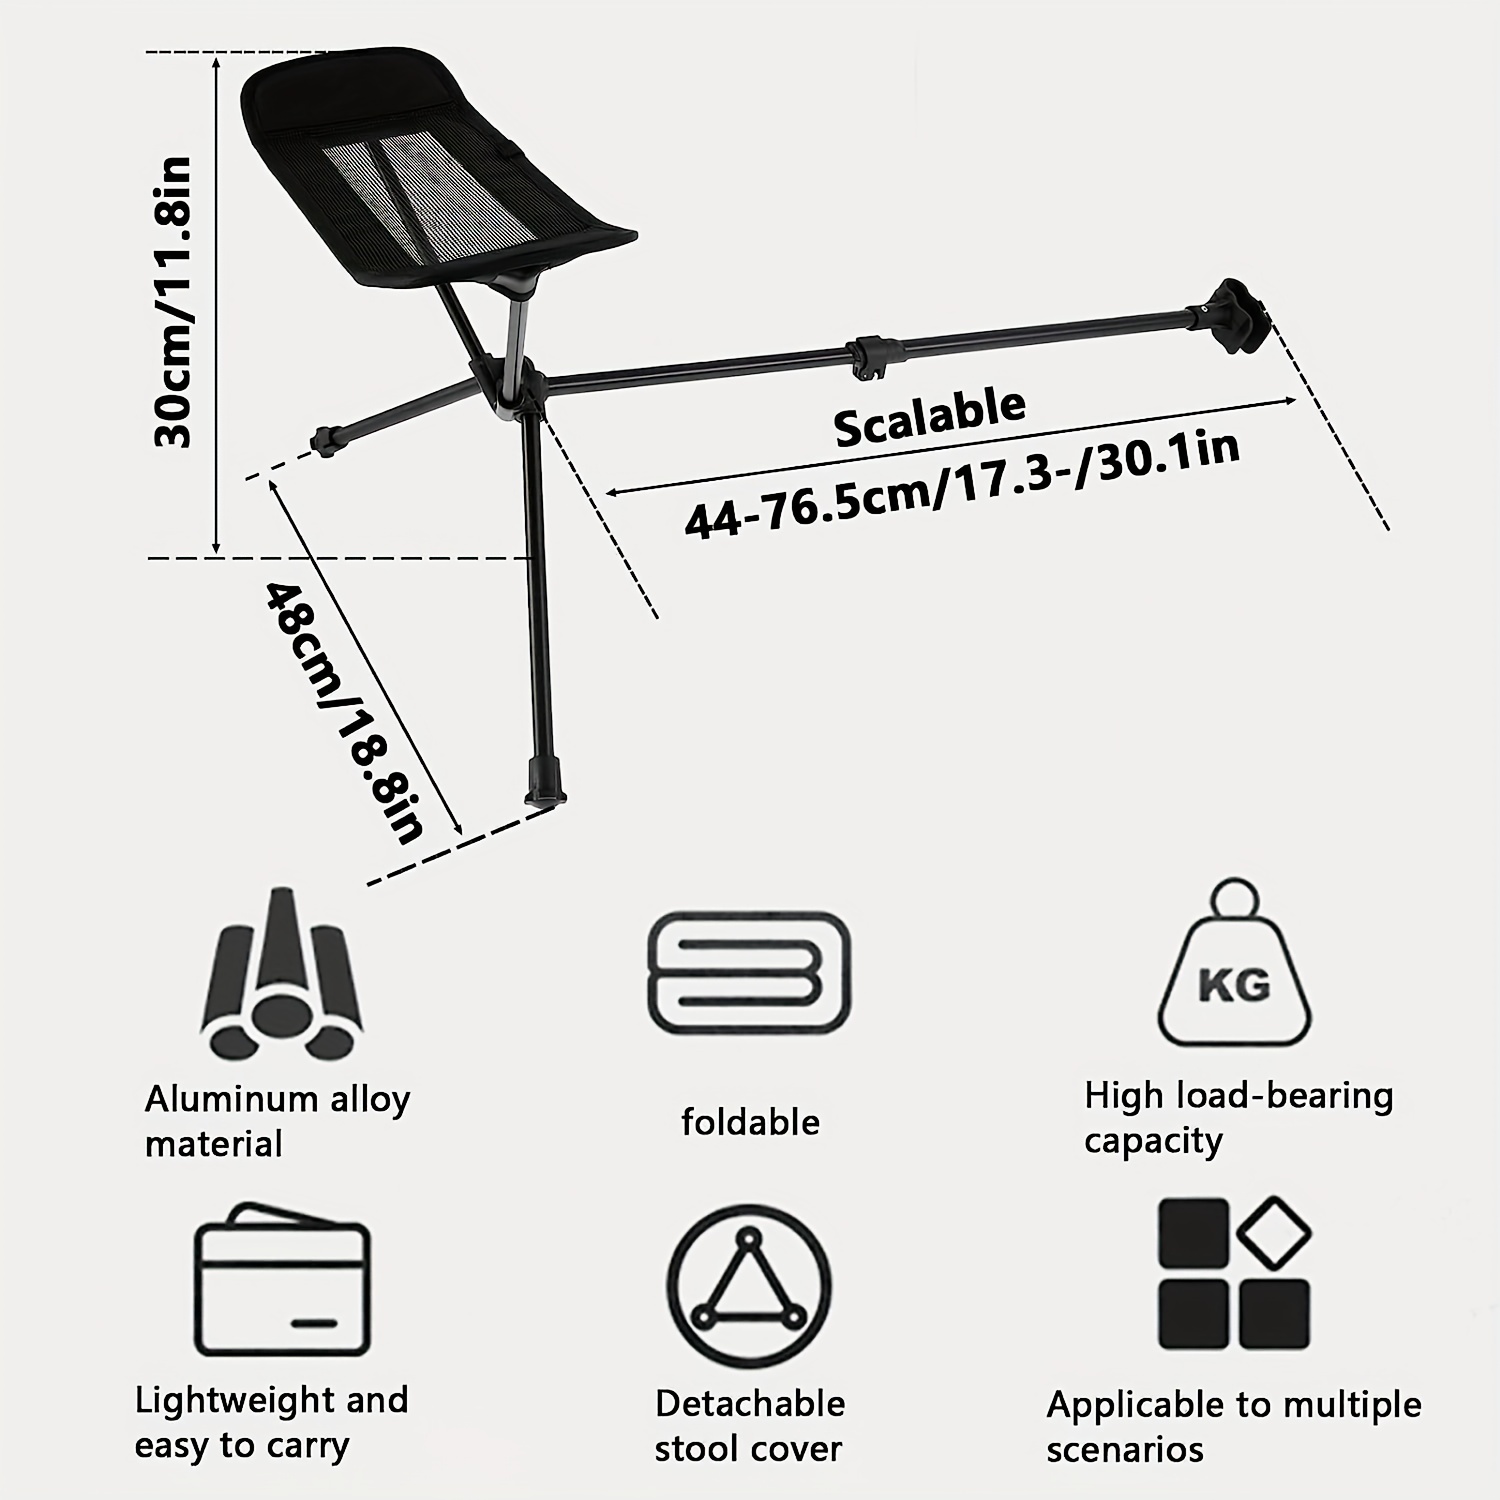 Hammock Chair Foot Rest Universal Camping Chair Foot Rest Folding  Attachable Retractable Footstool Moon Chair Kit For Hiking Fishing Beach  (black)